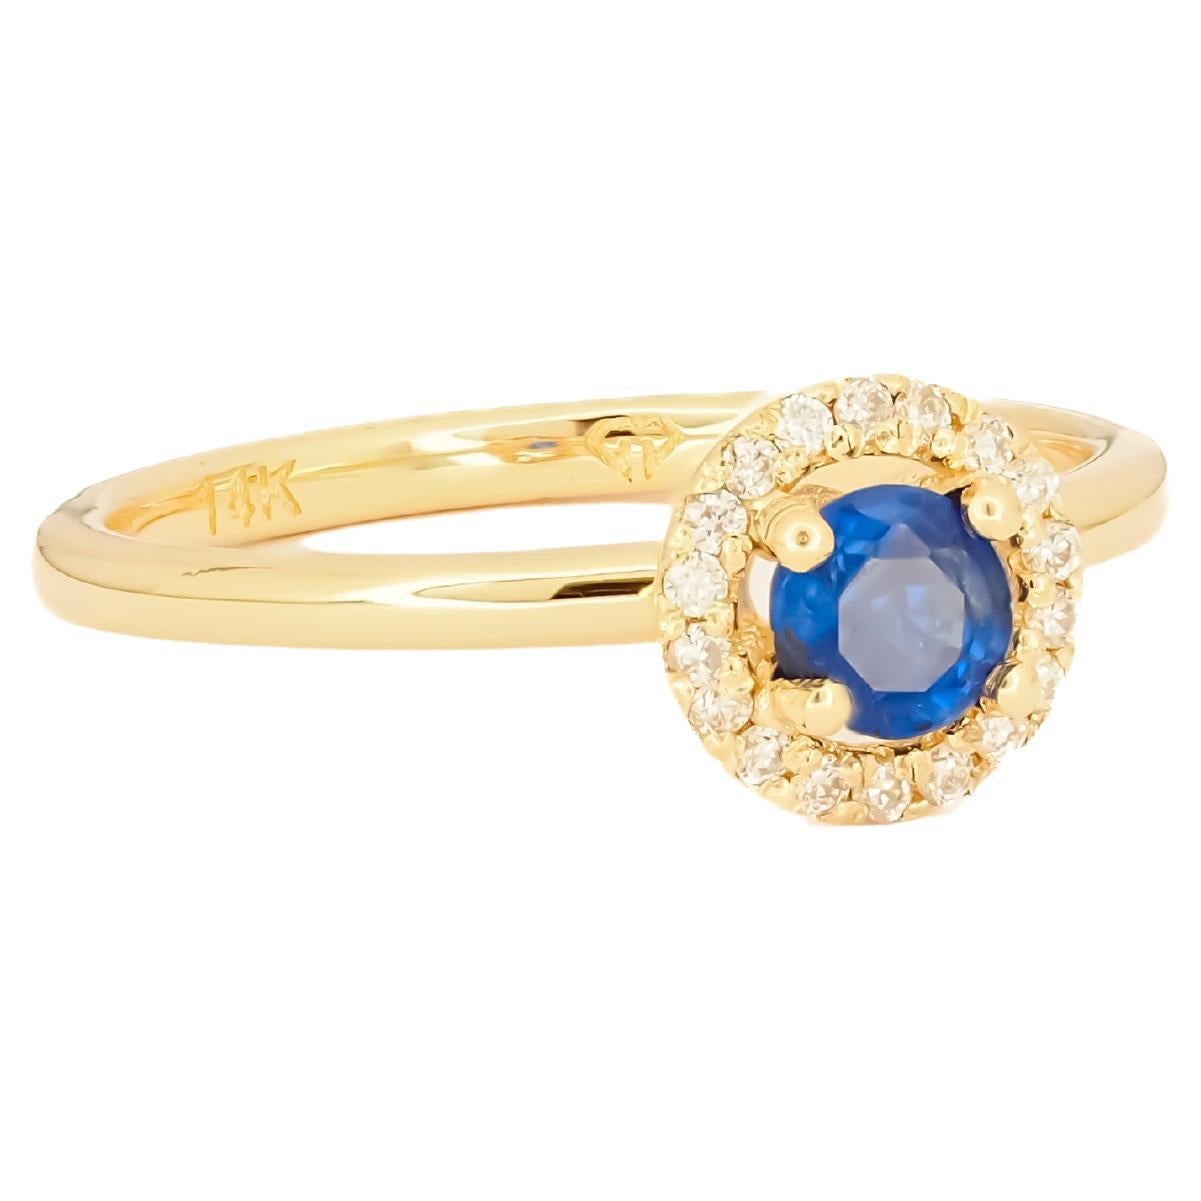 For Sale:  Halo Sapphire Ring with Diamonds in 14 Karat Gold, Sapphire Gold Ring